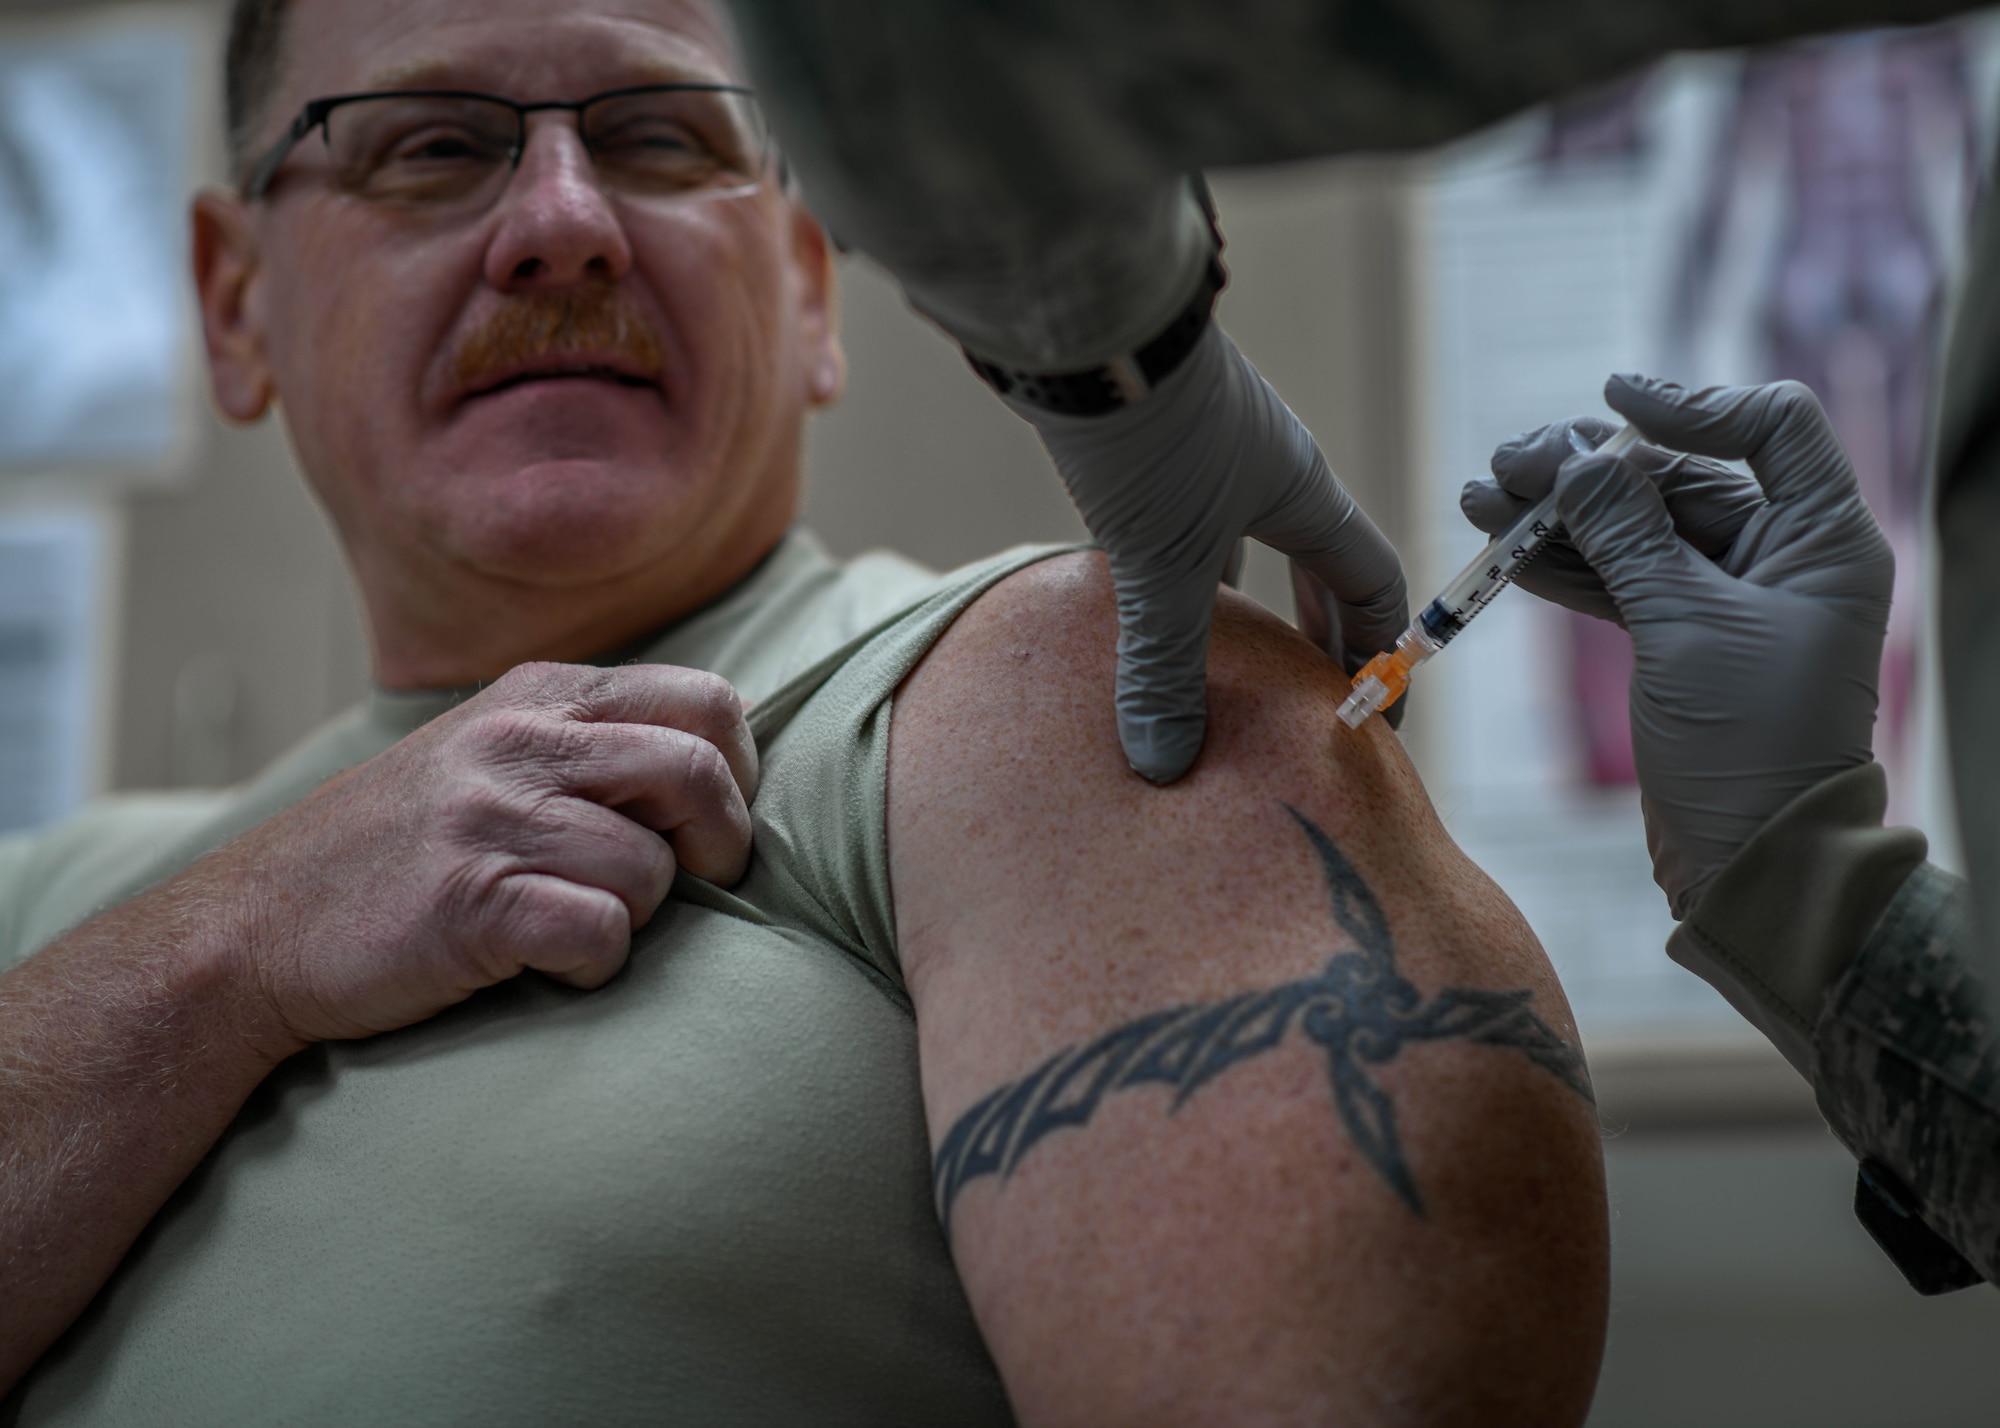 The 910th Medical Squadron helps ensure Youngstown Air Reserve Station's airmen are combat-ready by providing basic medical services, evaluations and immunizations.